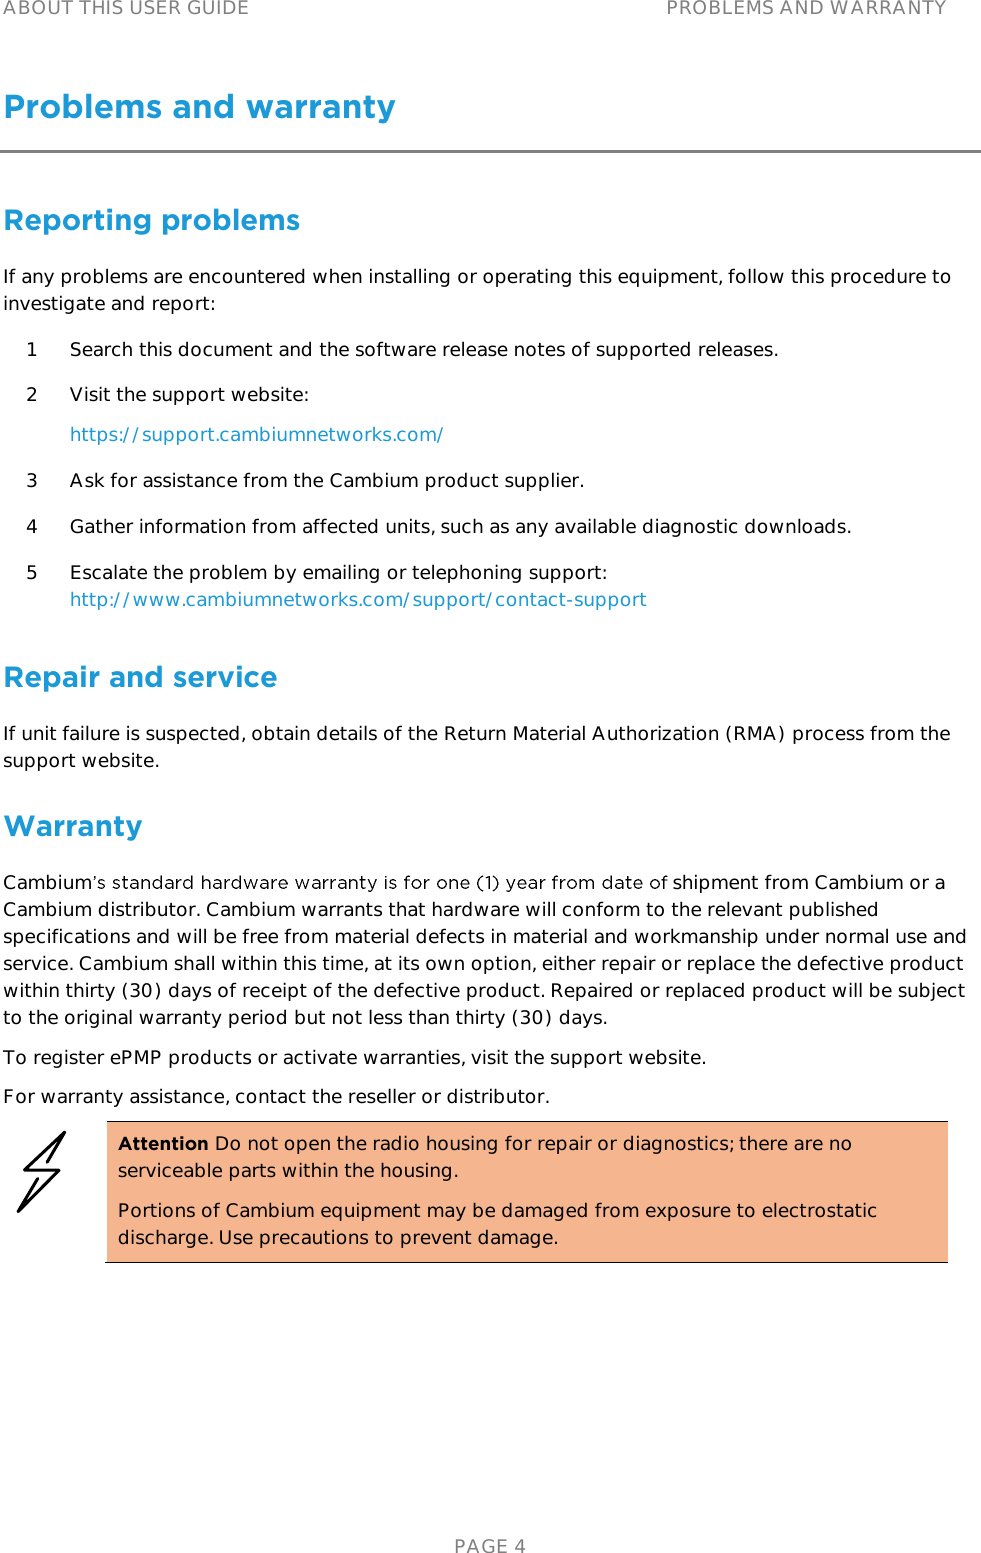 ABOUT THIS USER GUIDE PROBLEMS AND WARRANTY   PAGE 4 Problems and warranty Reporting problems If any problems are encountered when installing or operating this equipment, follow this procedure to investigate and report: 1 Search this document and the software release notes of supported releases. 2 Visit the support website: https://support.cambiumnetworks.com/ 3 Ask for assistance from the Cambium product supplier. 4 Gather information from affected units, such as any available diagnostic downloads. 5 Escalate the problem by emailing or telephoning support: http://www.cambiumnetworks.com/support/contact-support Repair and service If unit failure is suspected, obtain details of the Return Material Authorization (RMA) process from the support website. Warranty Cambium  shipment from Cambium or a Cambium distributor. Cambium warrants that hardware will conform to the relevant published specifications and will be free from material defects in material and workmanship under normal use and service. Cambium shall within this time, at its own option, either repair or replace the defective product within thirty (30) days of receipt of the defective product. Repaired or replaced product will be subject to the original warranty period but not less than thirty (30) days. To register ePMP products or activate warranties, visit the support website. For warranty assistance, contact the reseller or distributor.  Attention Do not open the radio housing for repair or diagnostics; there are no serviceable parts within the housing. Portions of Cambium equipment may be damaged from exposure to electrostatic discharge. Use precautions to prevent damage.  